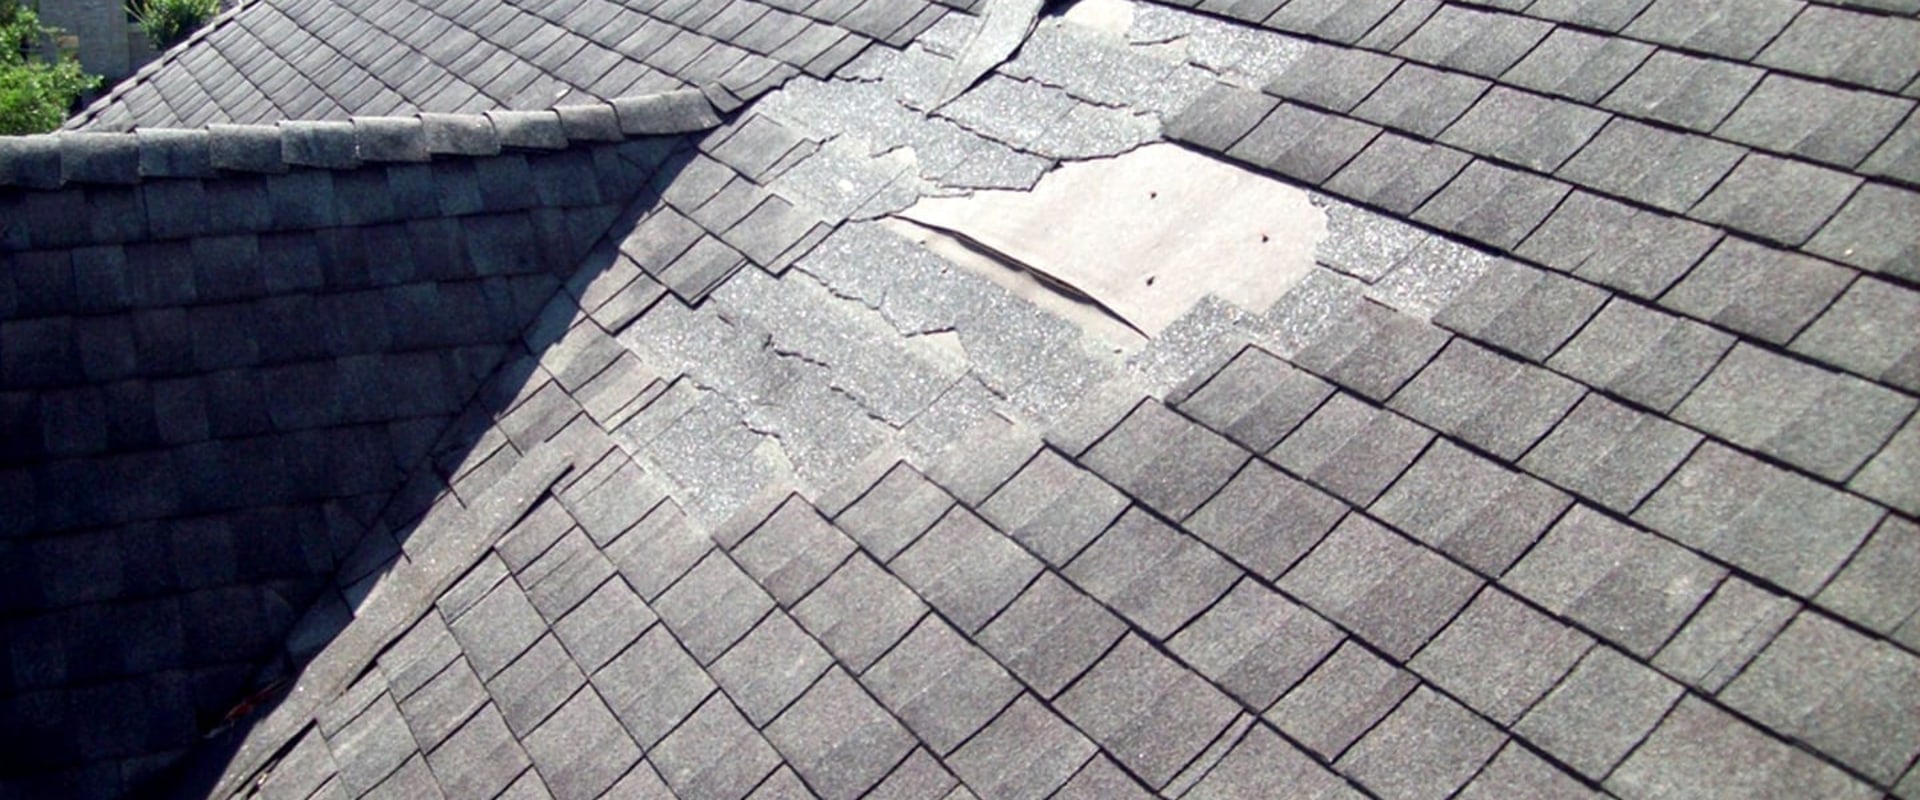 How do you know when a roof is bad?